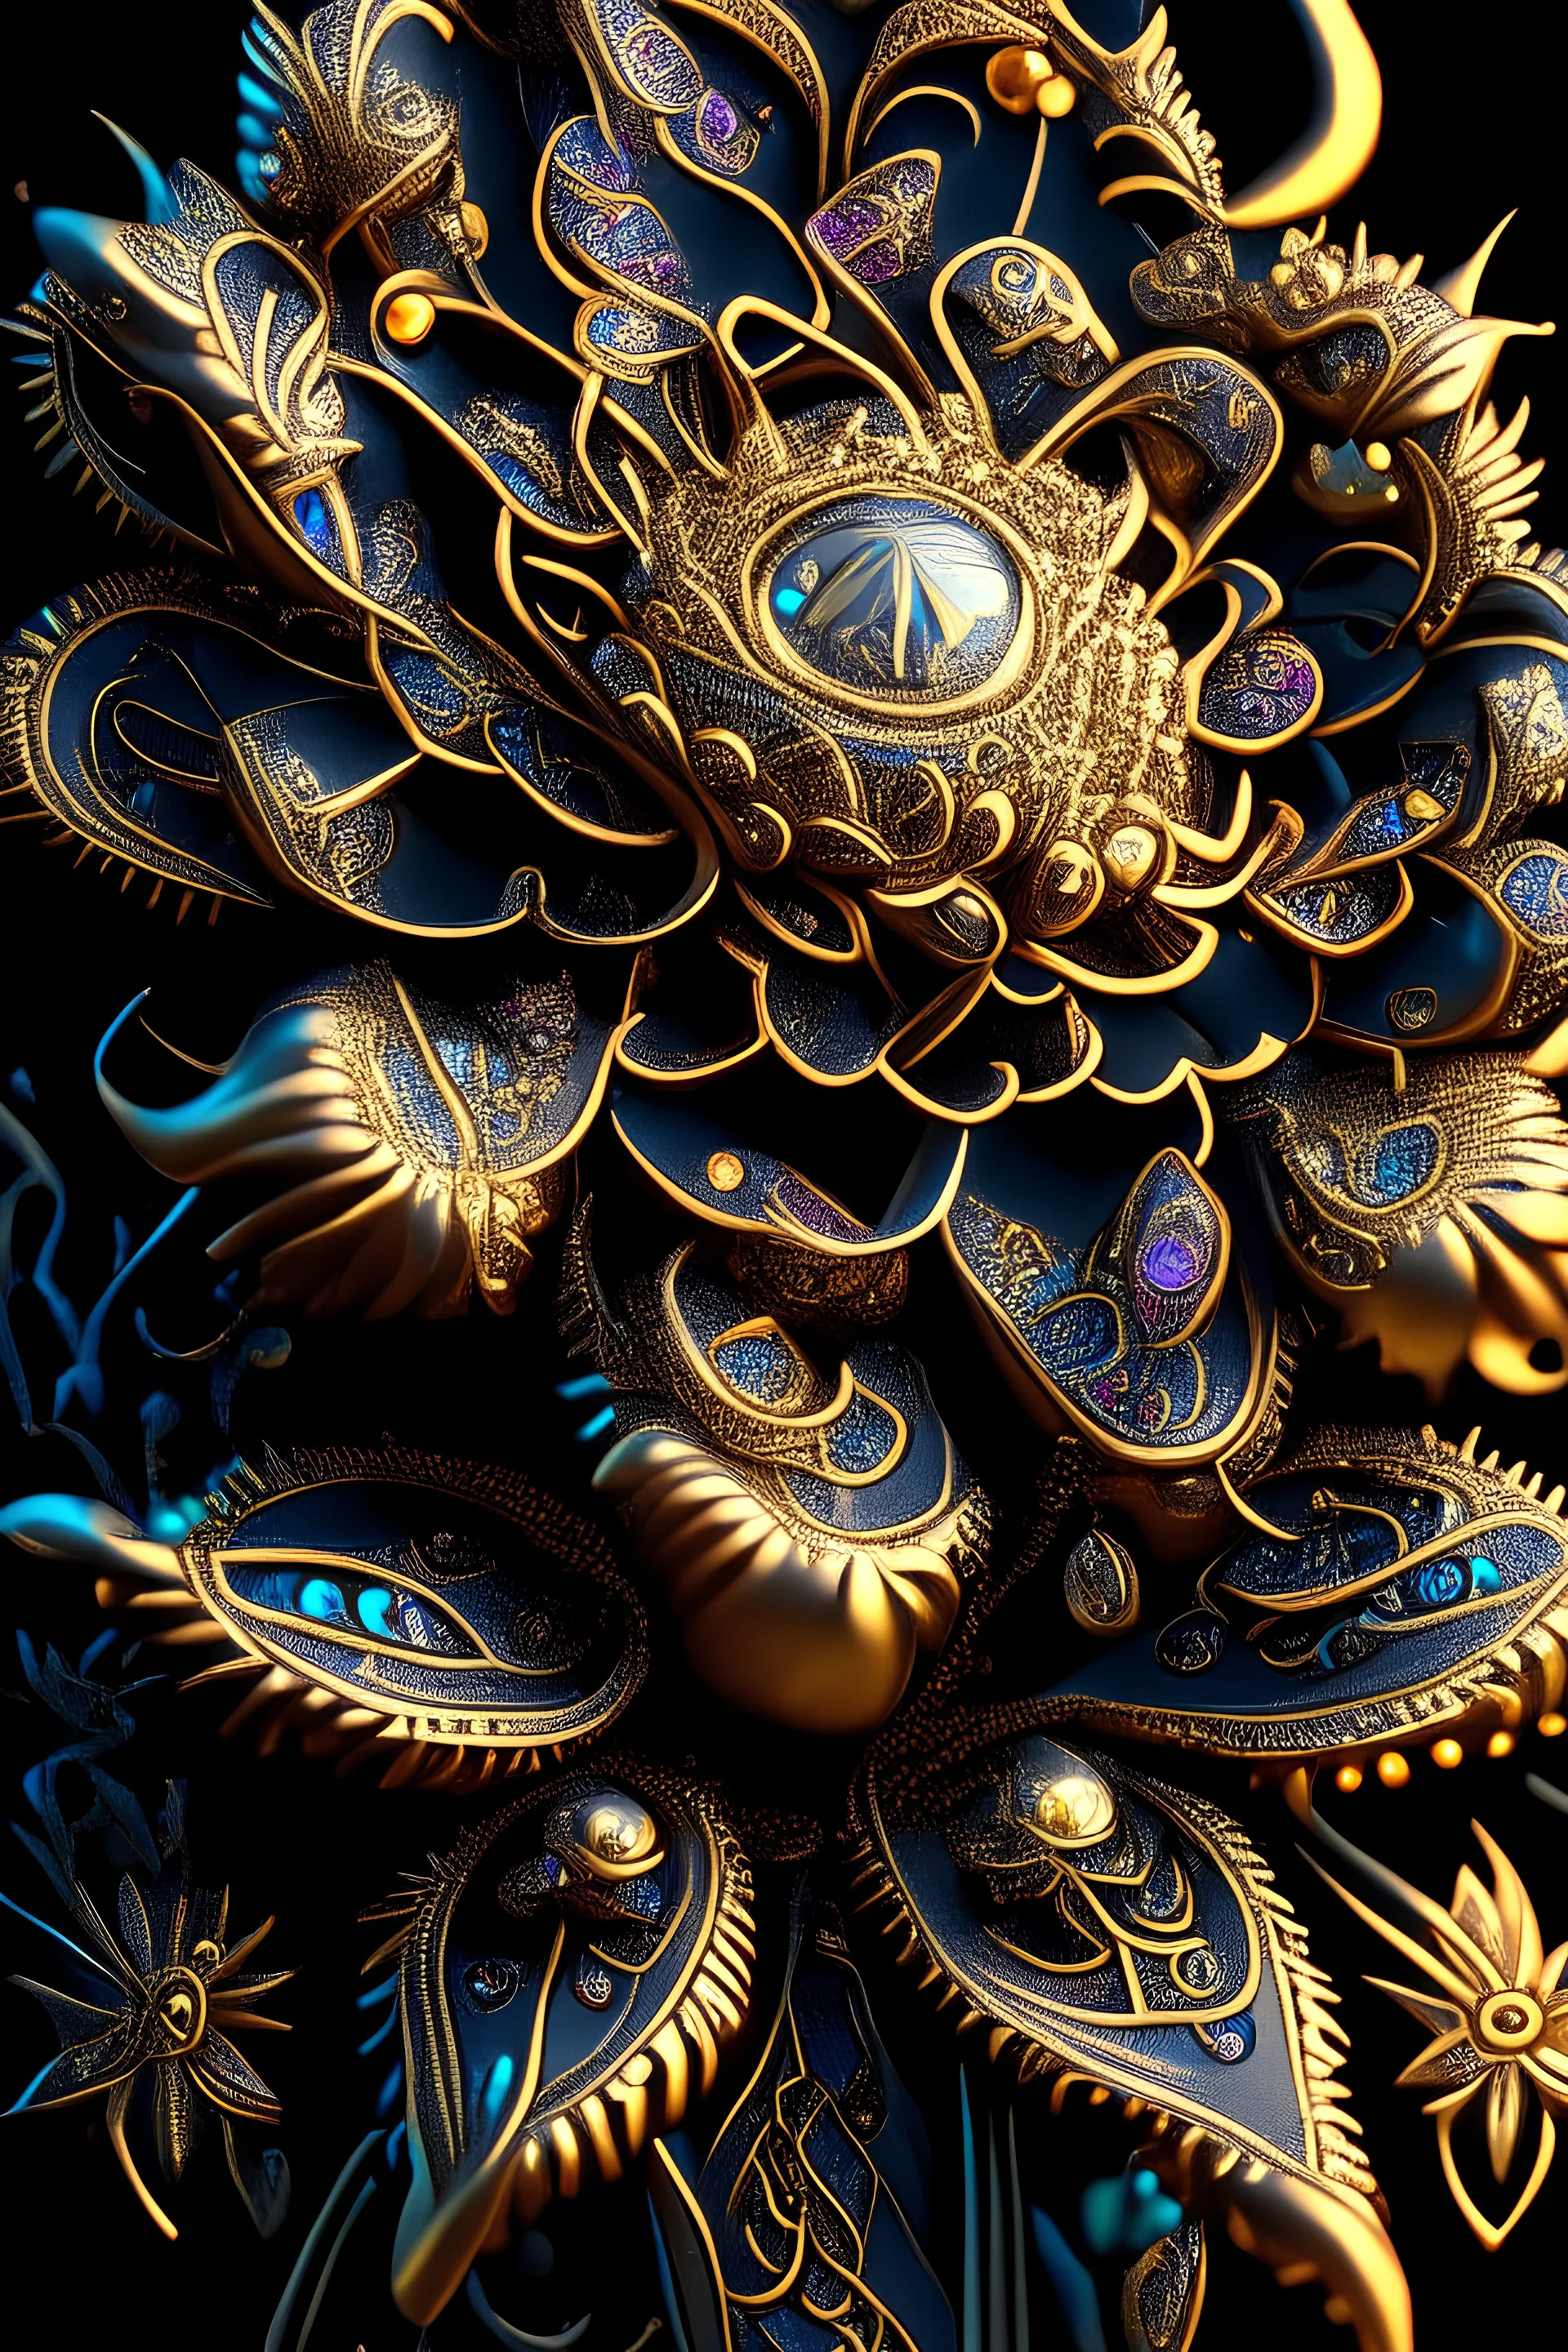 ultra detailed and intricate 3d rendering of a hyperrealistic “cyberpunk flower”: close up, symmetric, shinning gold, victorian ornament, baroque antique, tribalism, ancient , shamanism, cosmic fractals, dystopian, dendritic, stylized fantasy art by Kris Kuksi, Albrecht Durer, Kazuhiko Nakamura, artstation: award-winning: professional photography: atmospheric: commanding: fantastical: clarity: 16k: ultra quality: striking: brilliance: stunning colors: amazing depth: masterfully crafted.